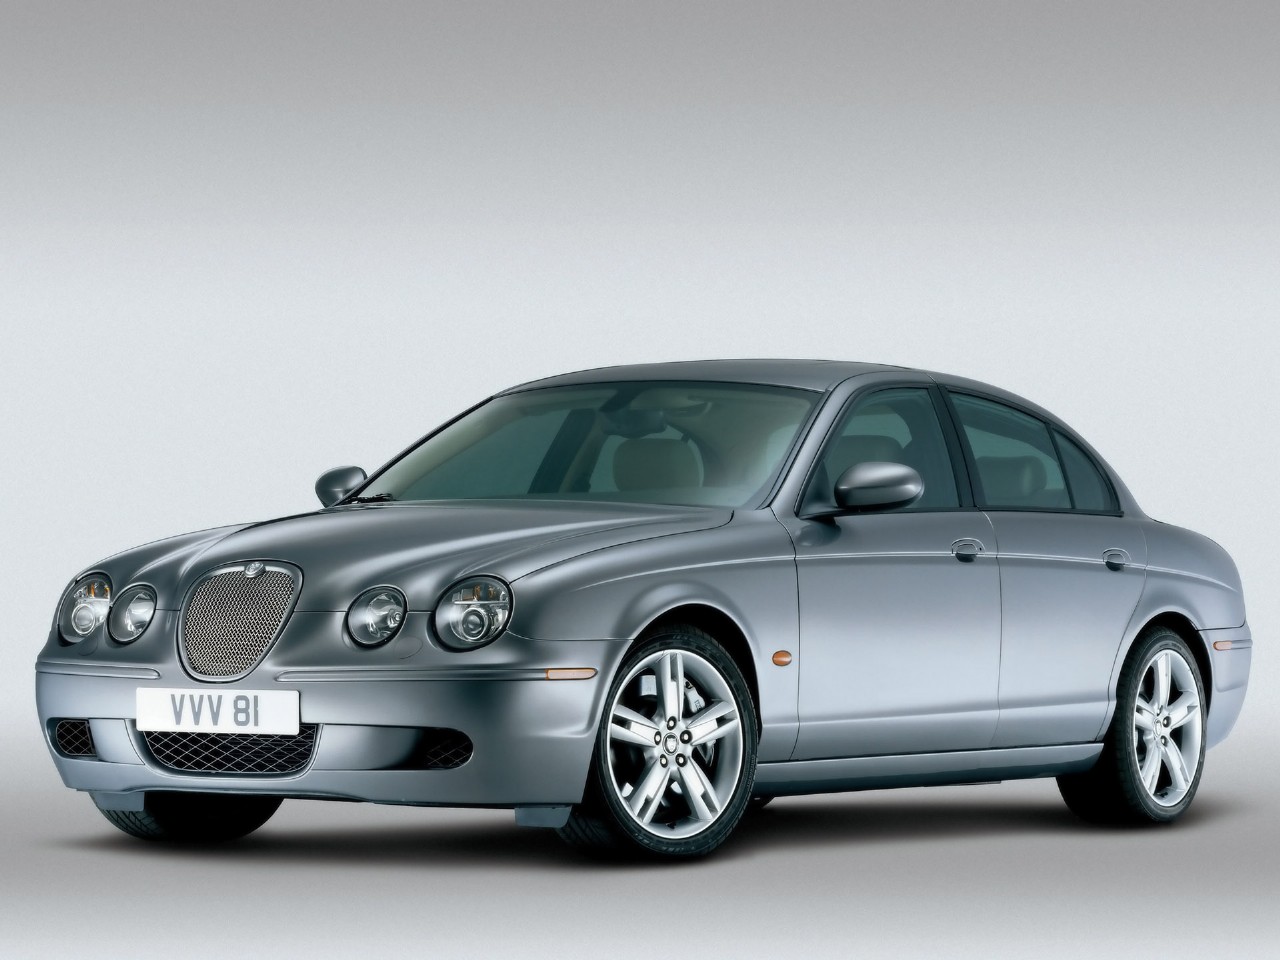 The oil capacity for the Jaguar S-Type